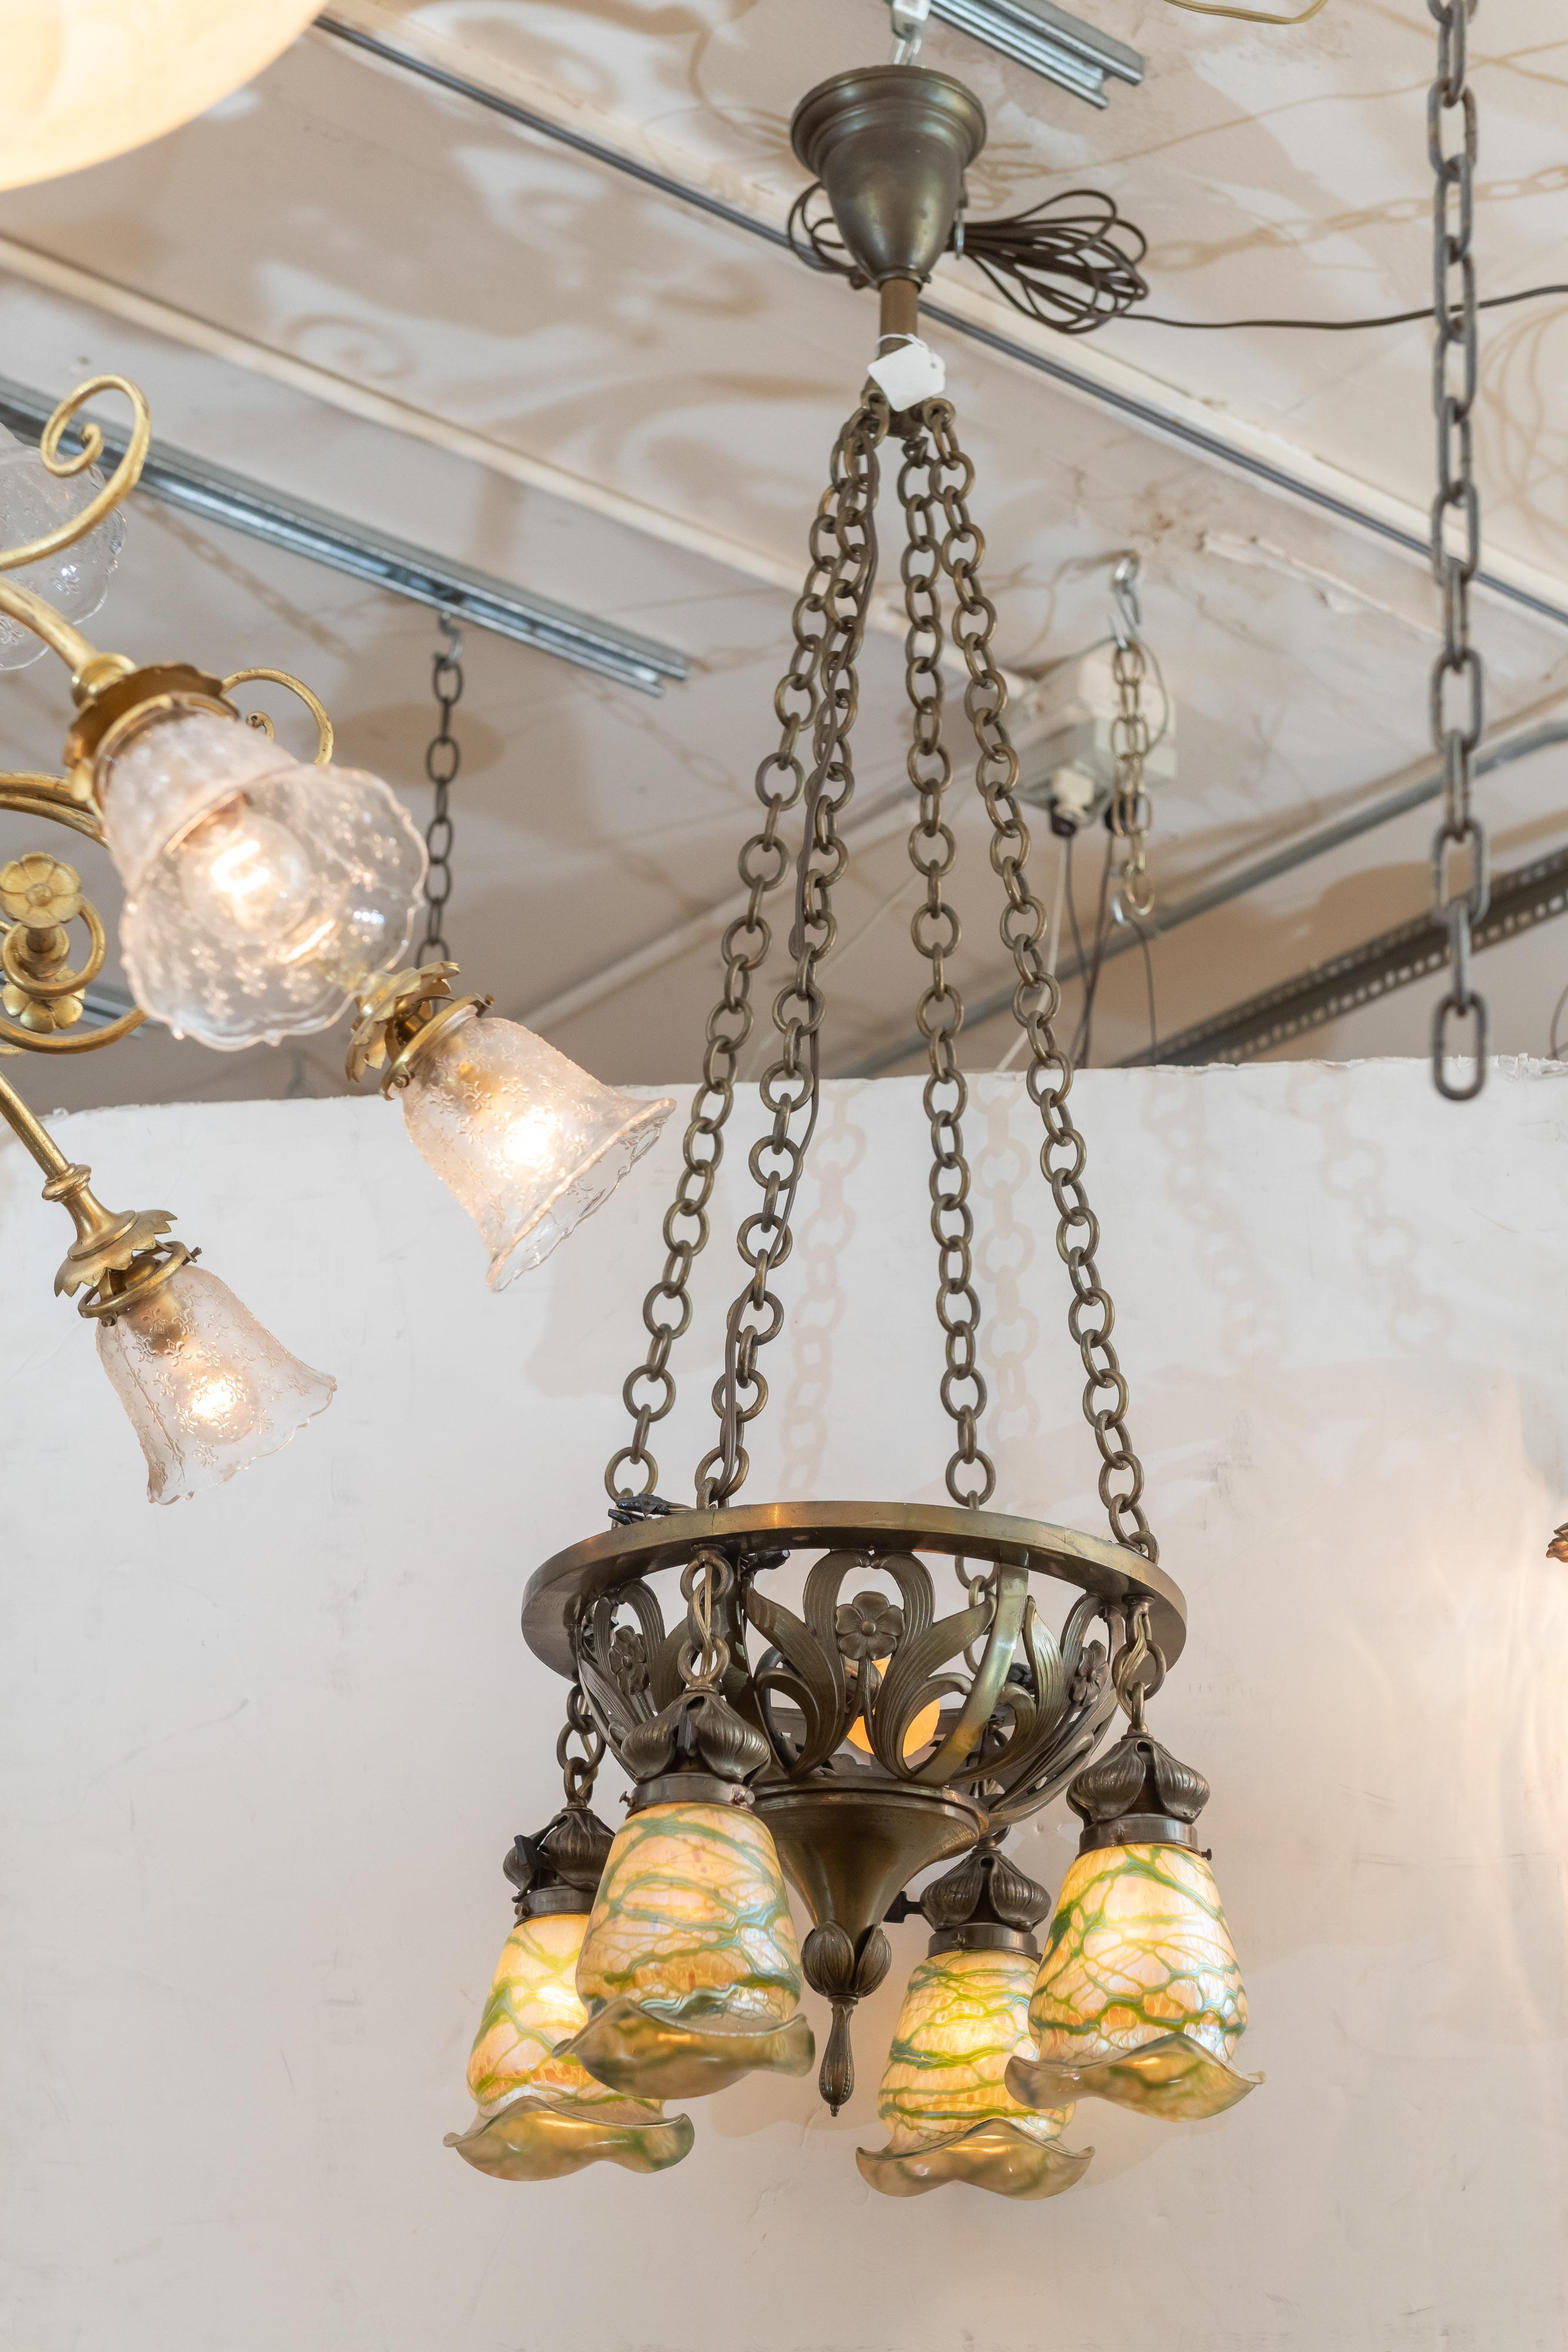 We are always on the lookout for quality art nouveau period lighting. We got a good one here. Sinewy lines and a center floral design highlight the chandelier. Now for the shades. Wow! is the best description. While the chandelier is American, the